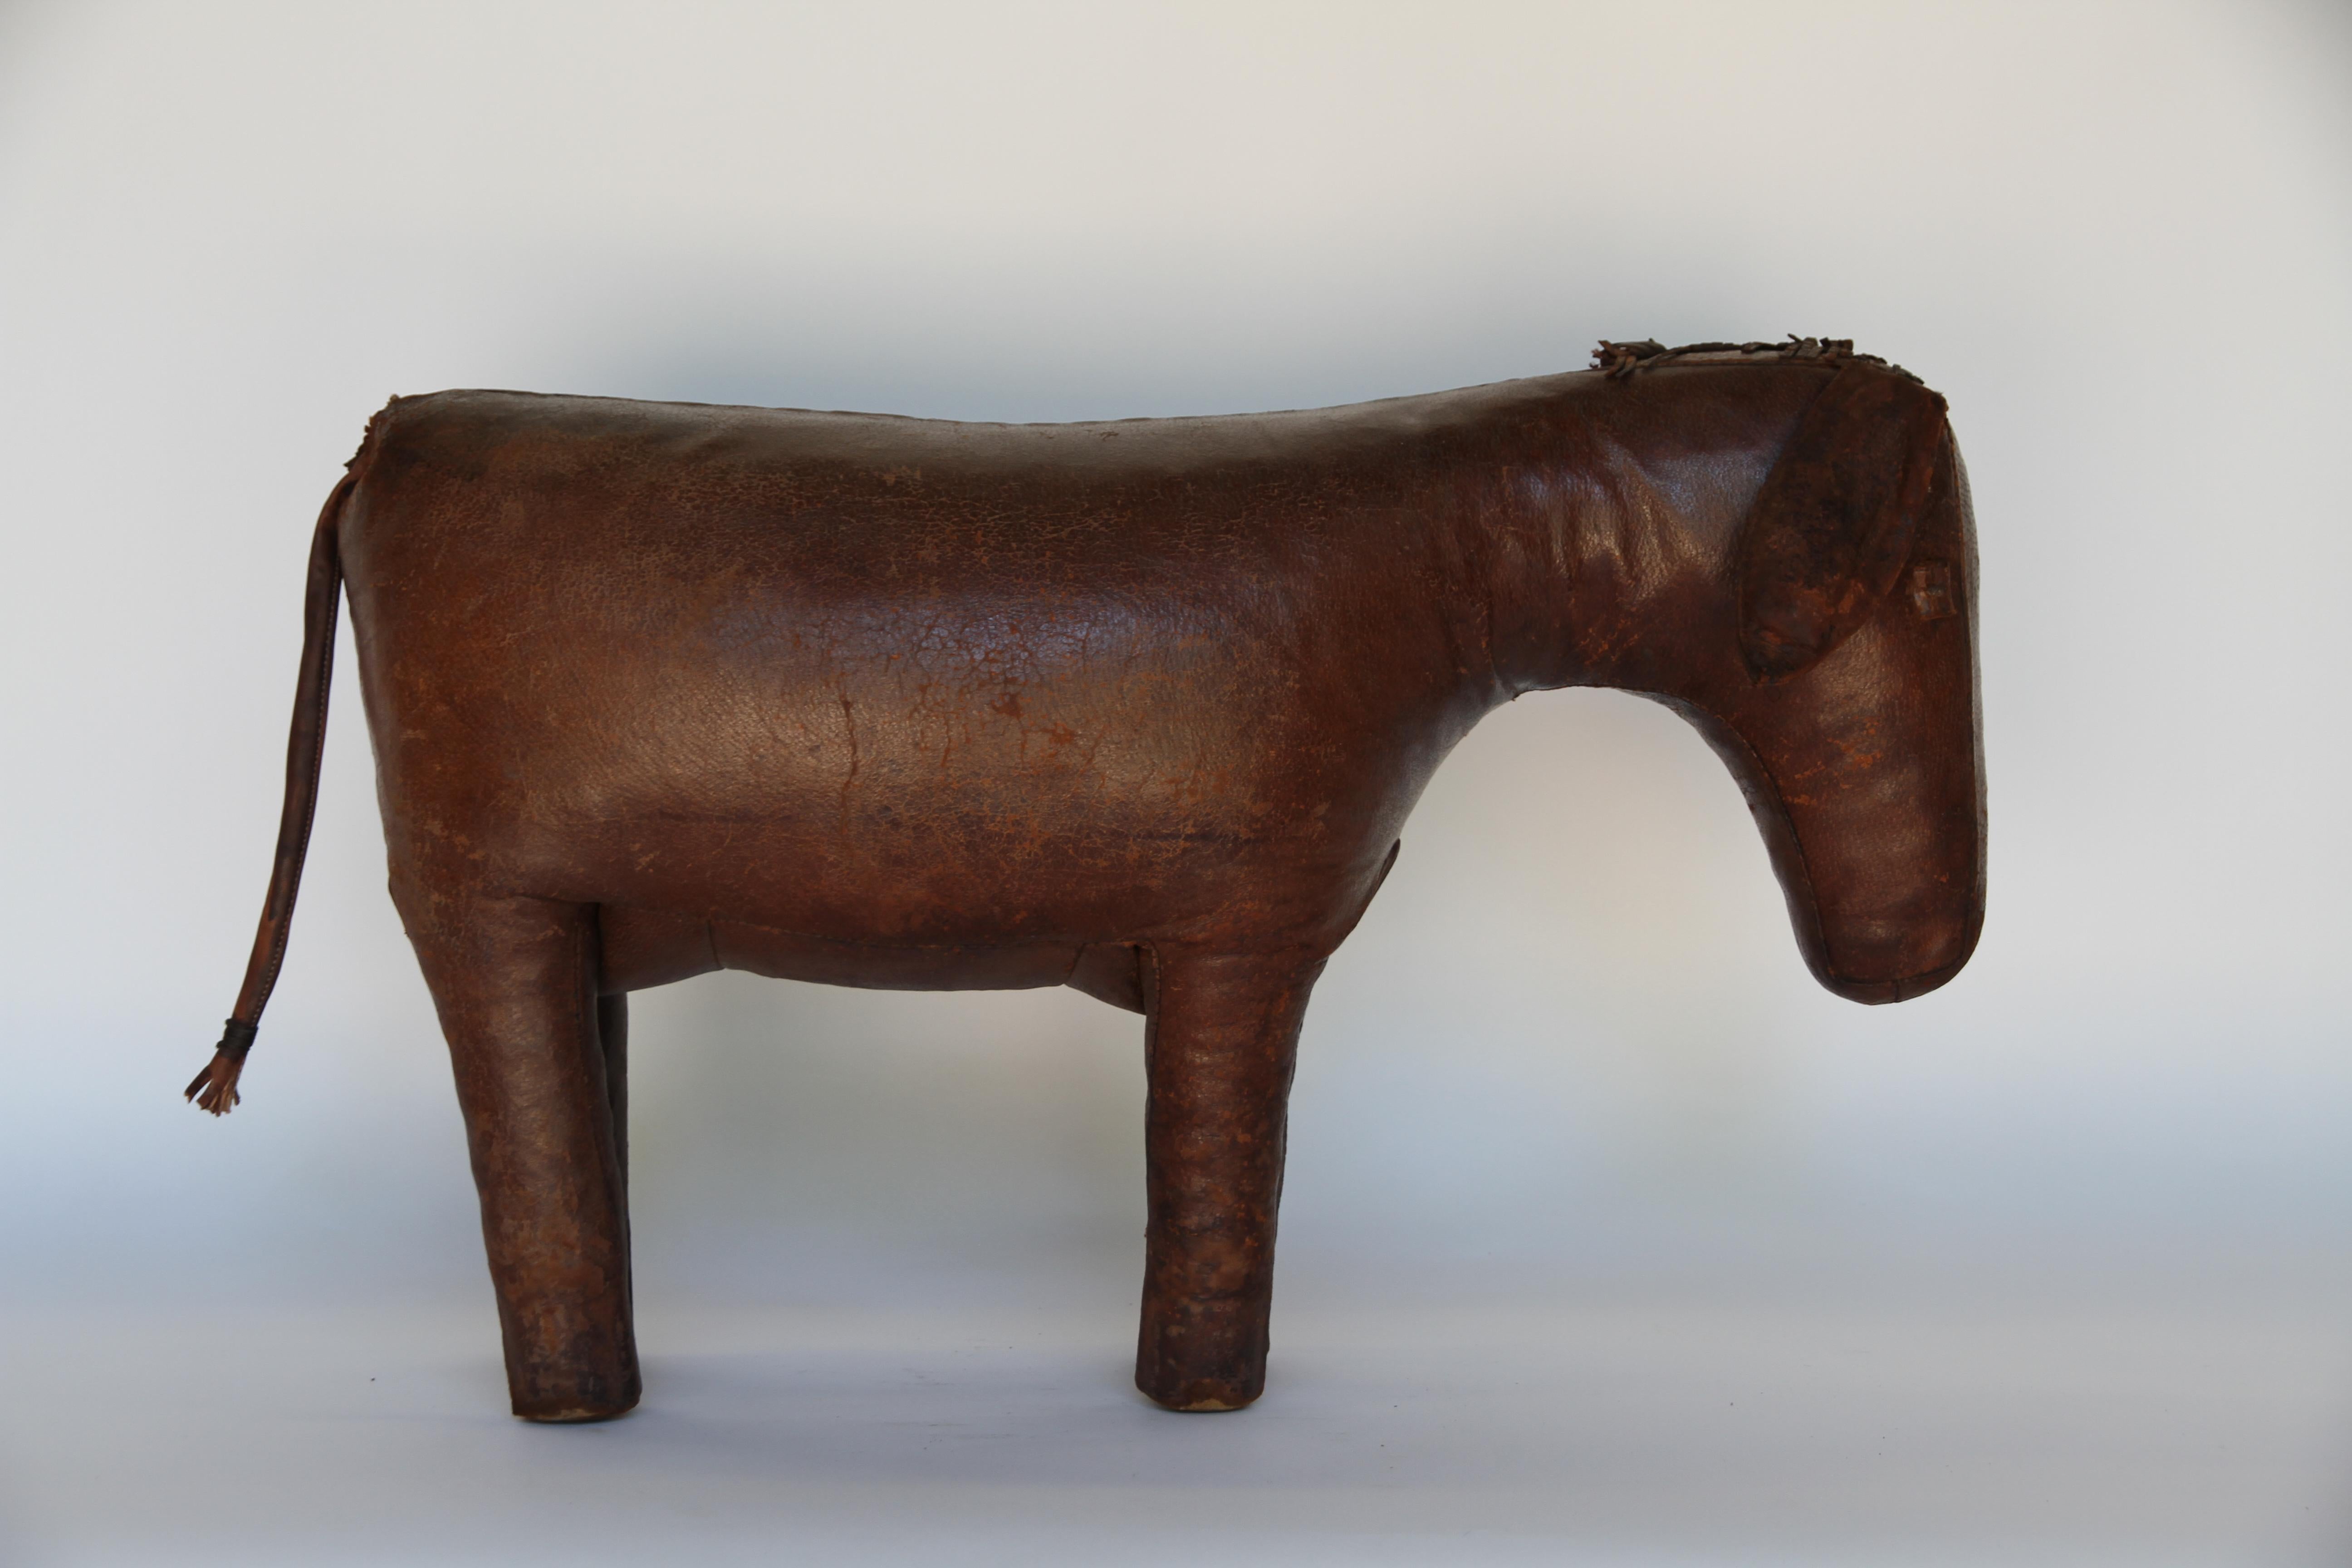 Beautiful leather donkey footstool by Dimitri Omersa. Omersa Co. in England produced several leather animals as footstools for Abercrombie and Fitch. This sweet donkey is a wonderful conversation piece as well as useful as a footrest.